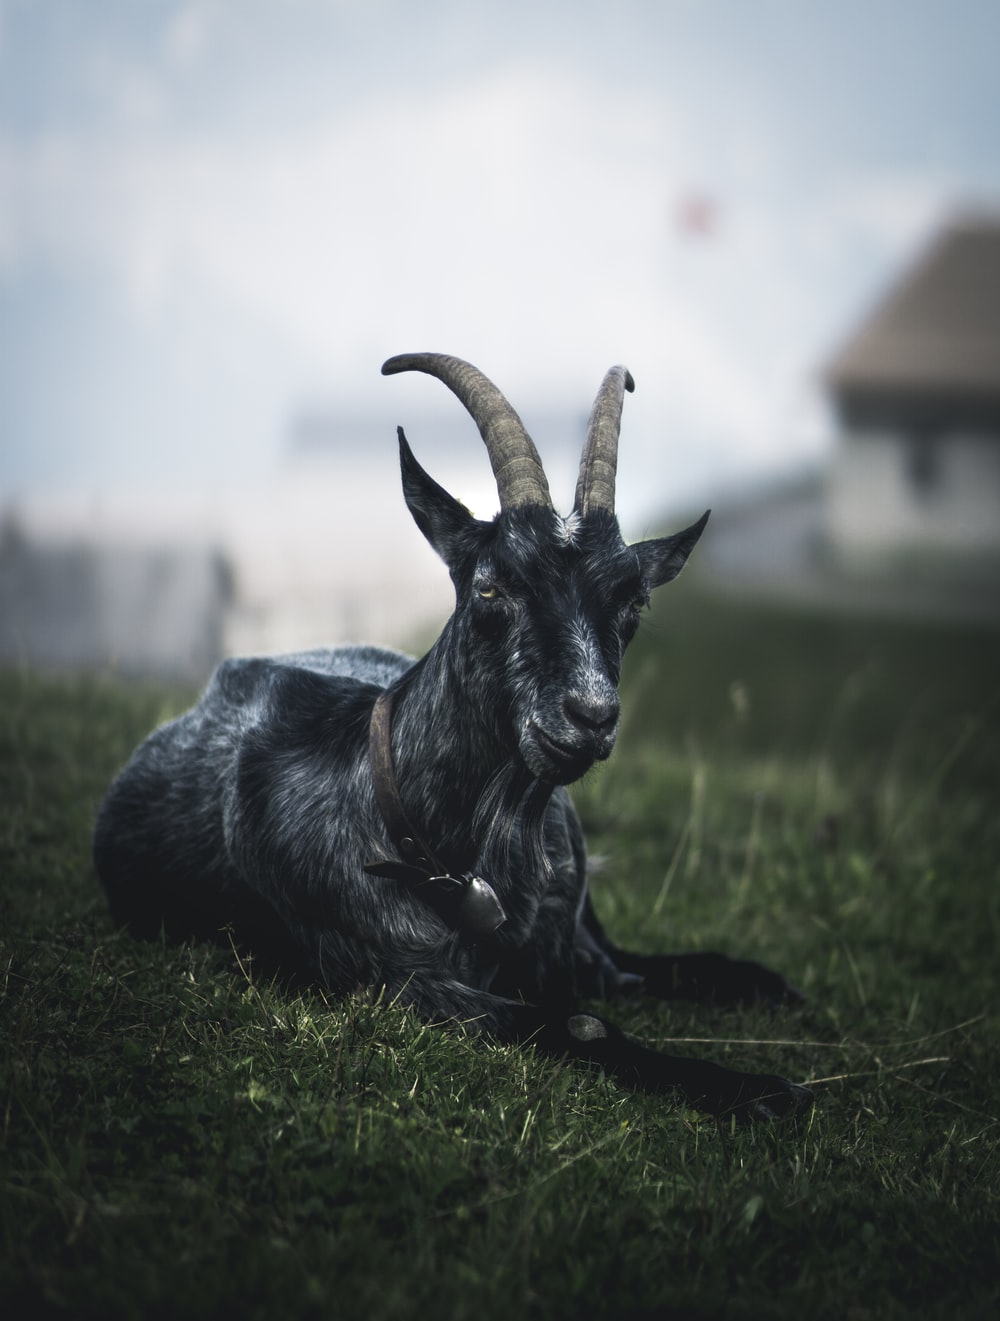 Black Goat Picture. Download Free Image